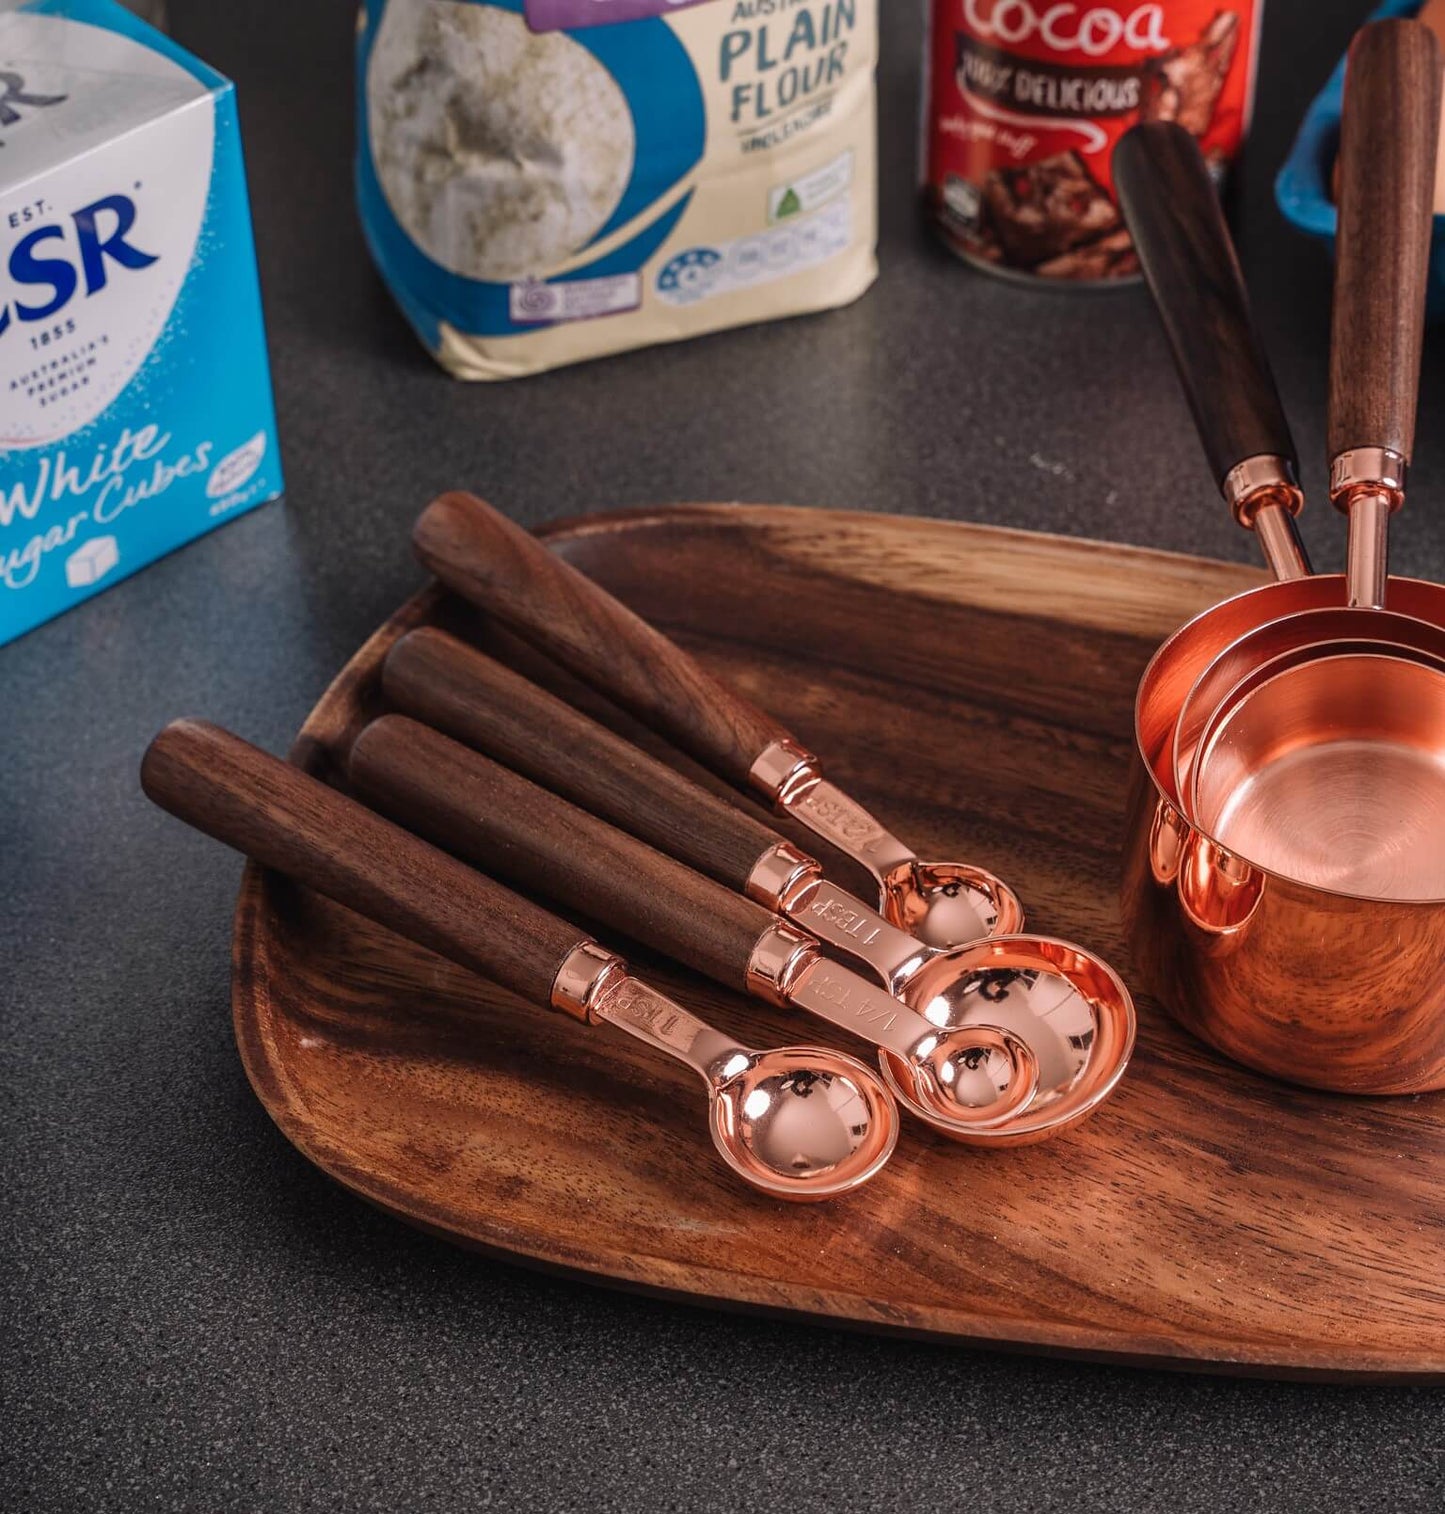 Copper Plated Measuring Cups and Spoons